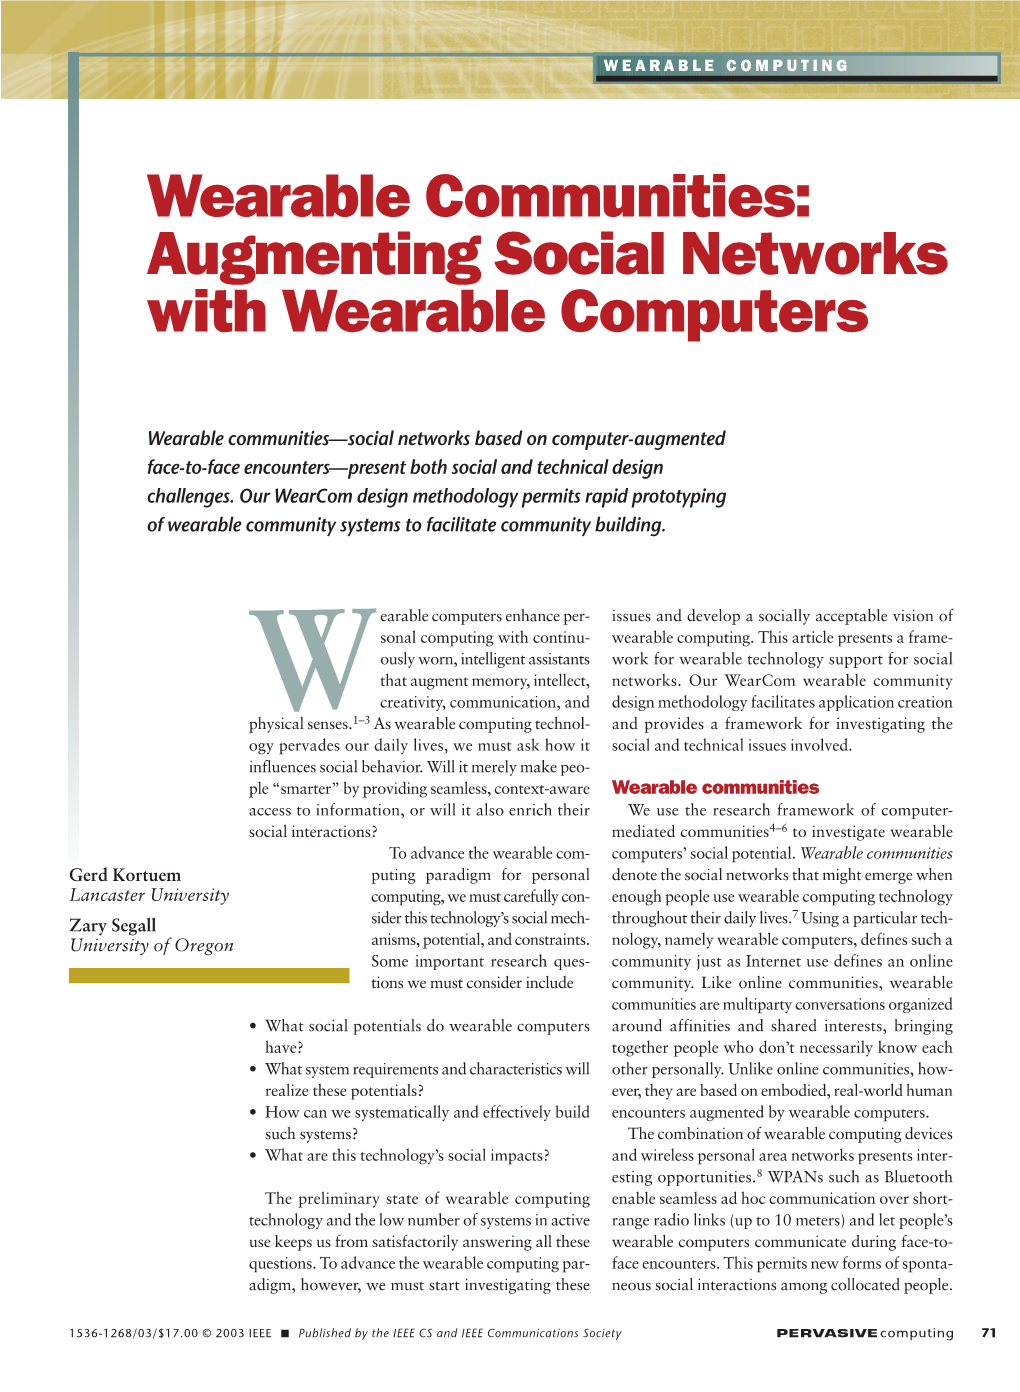 Augmenting Social Networks with Wearable Computers